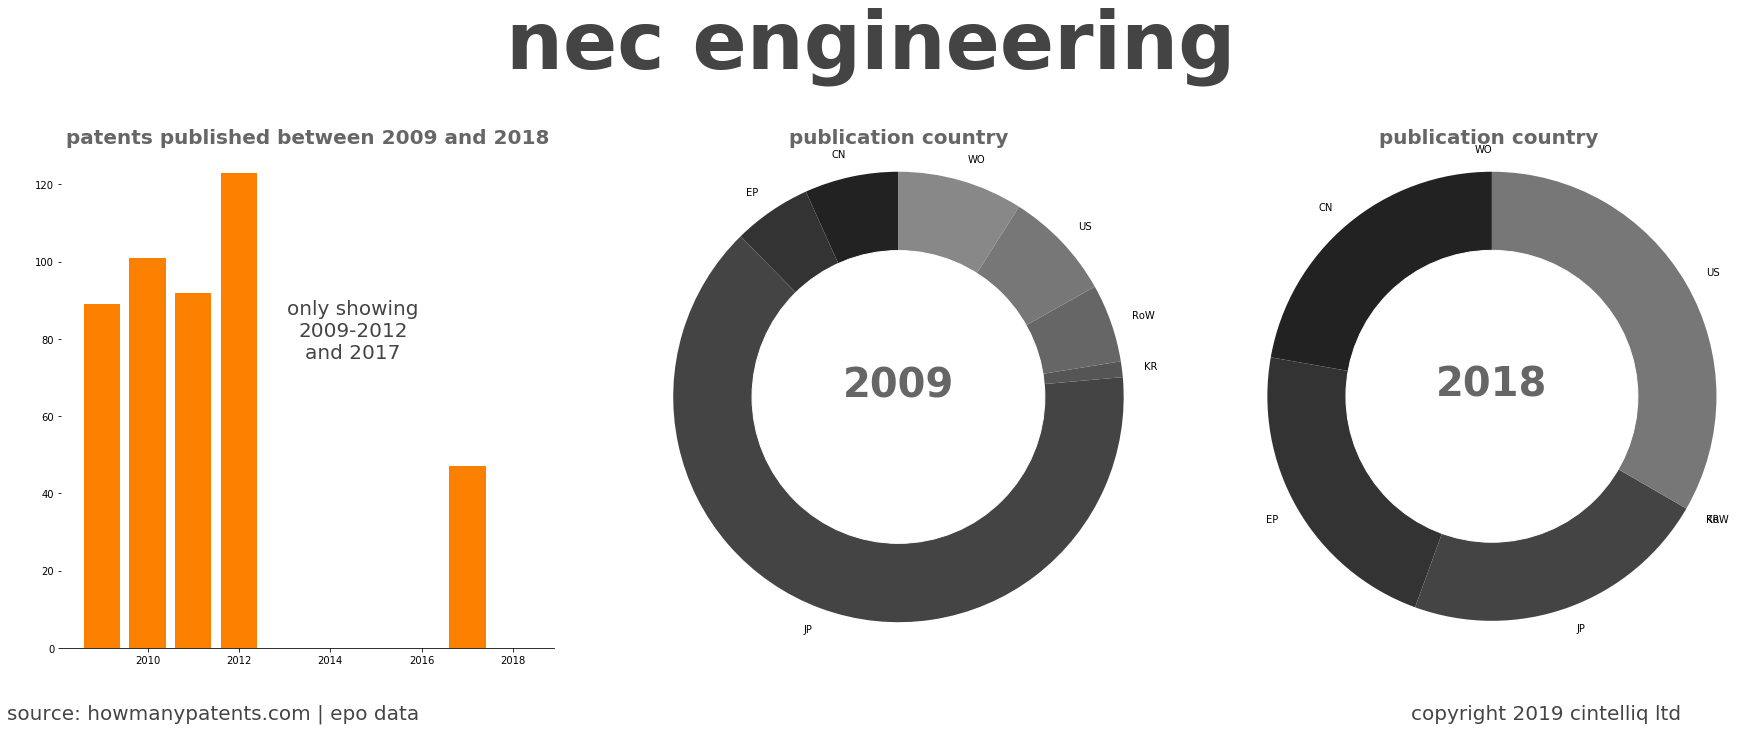 summary of patents for Nec Engineering